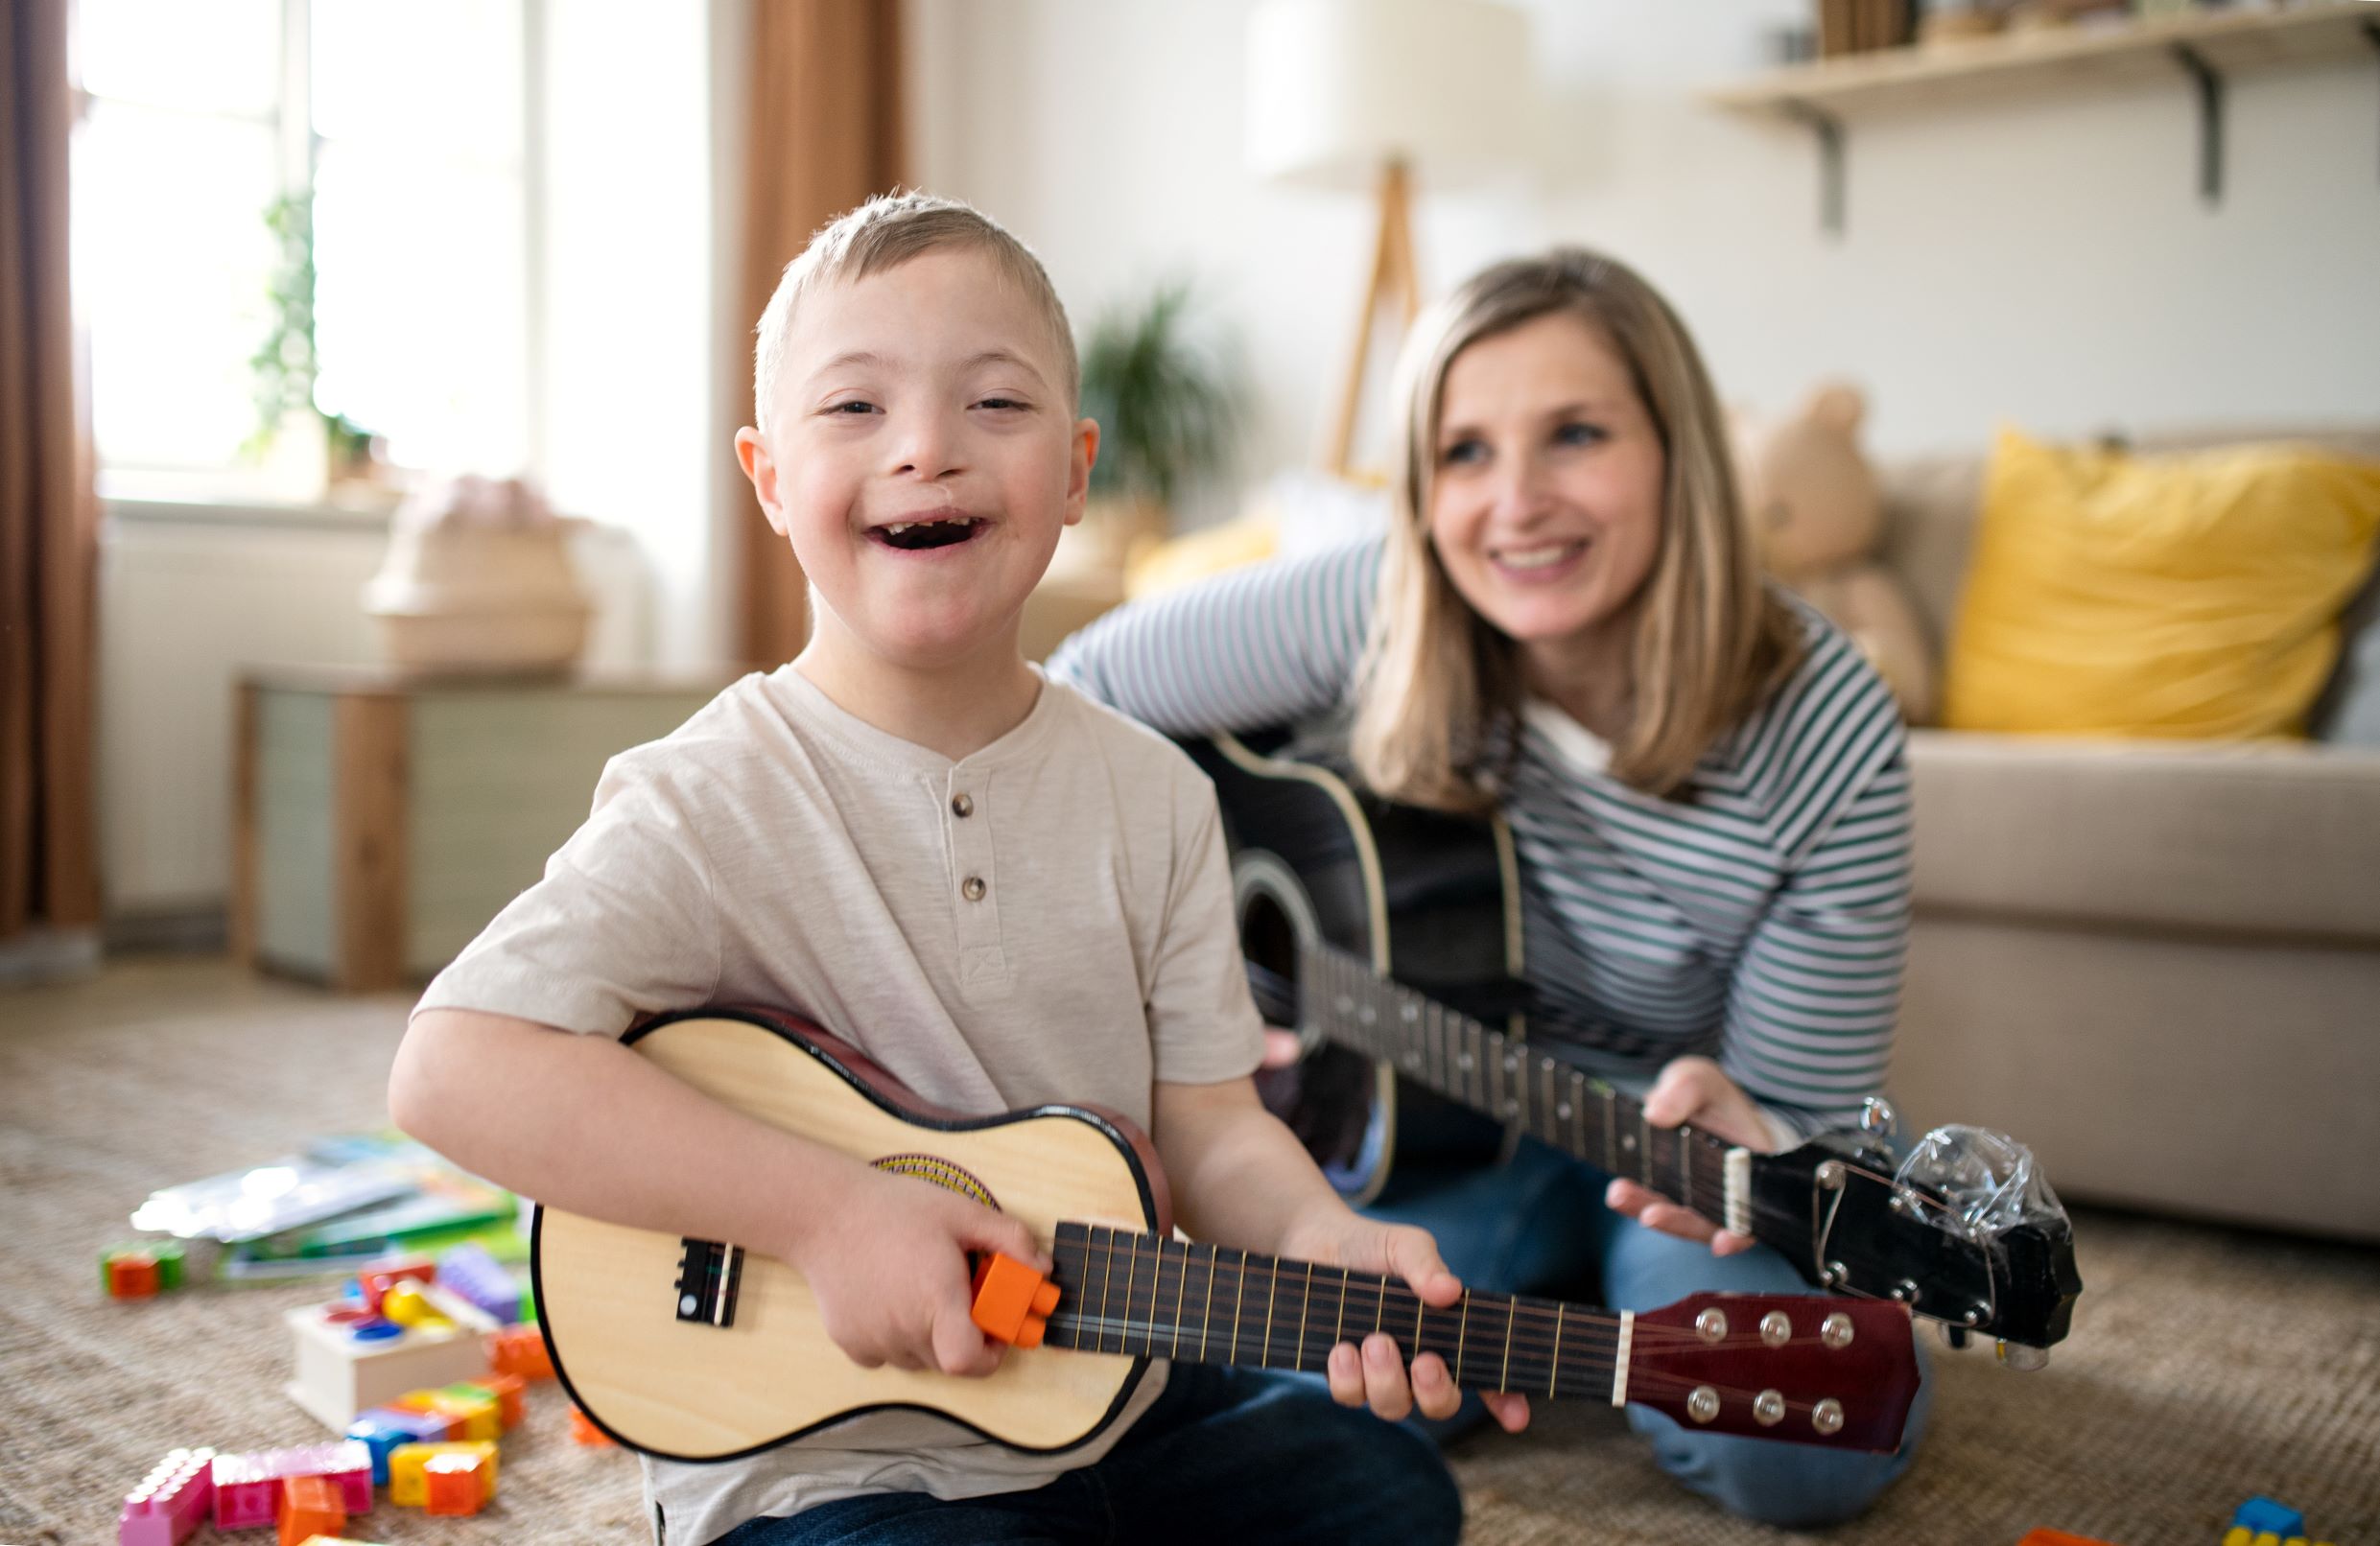 Mom and child with down syndrome playing guitar.